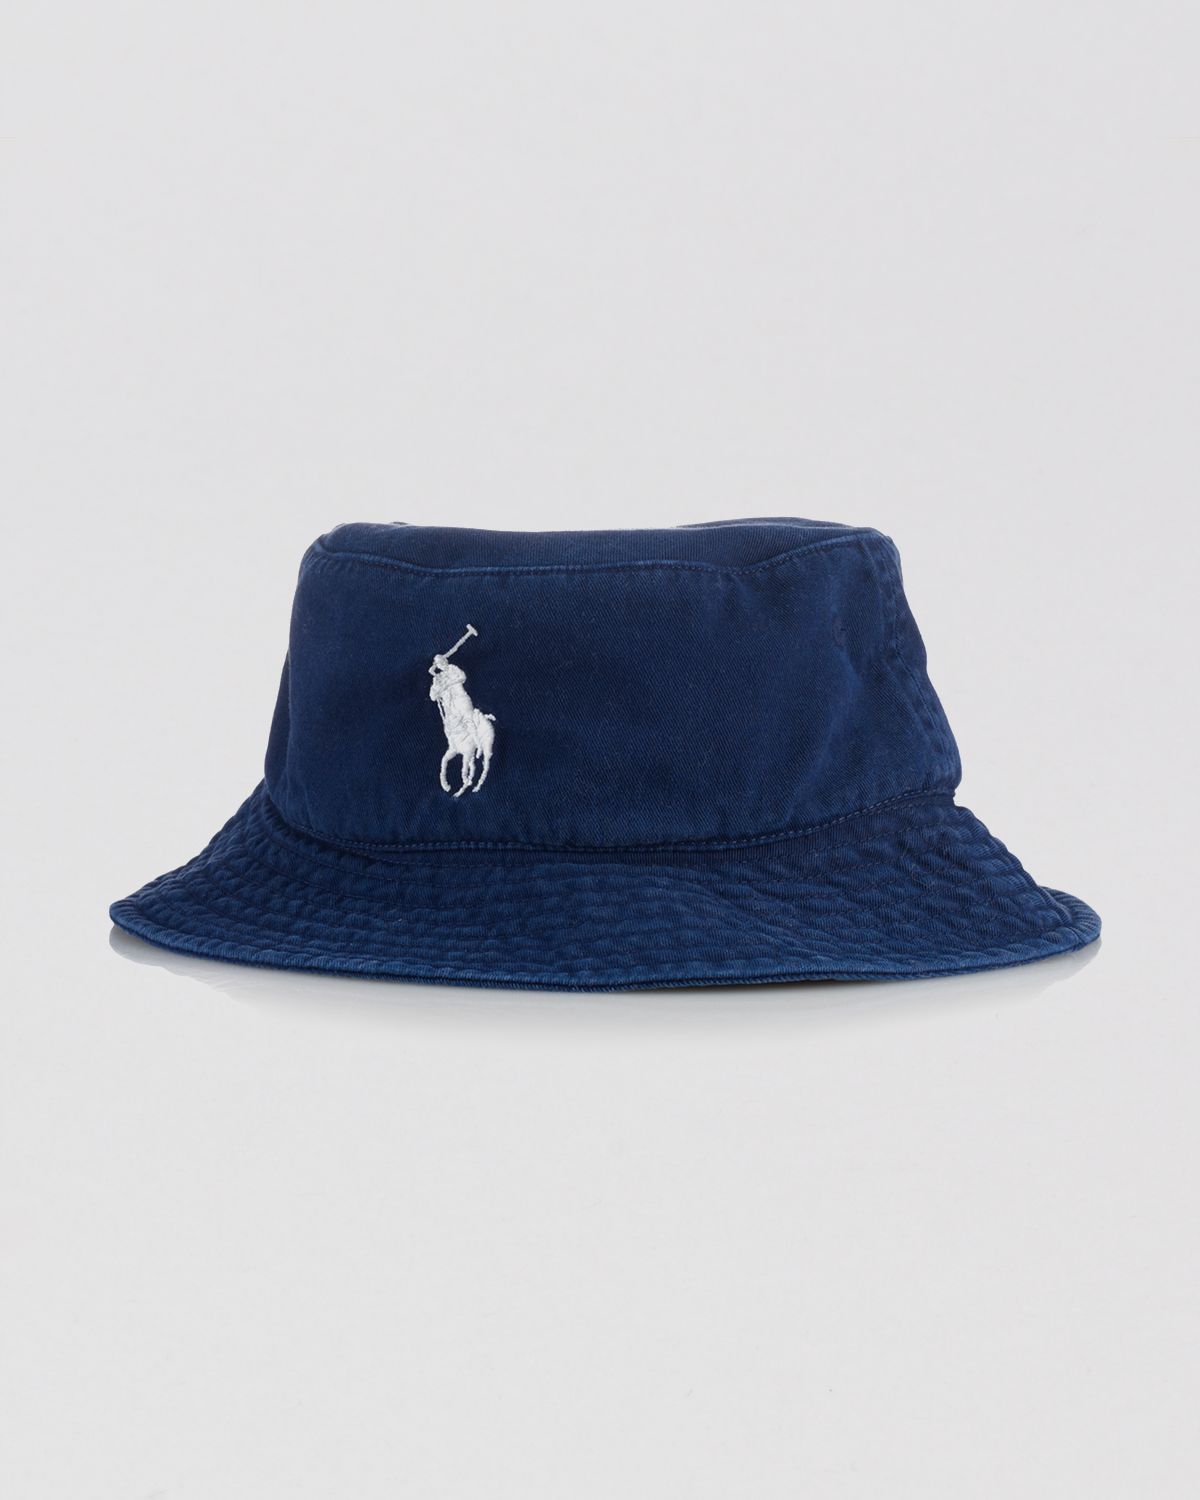 Ralph Lauren Polo Us Open Chino Bucket Hat in French Navy (Blue ...